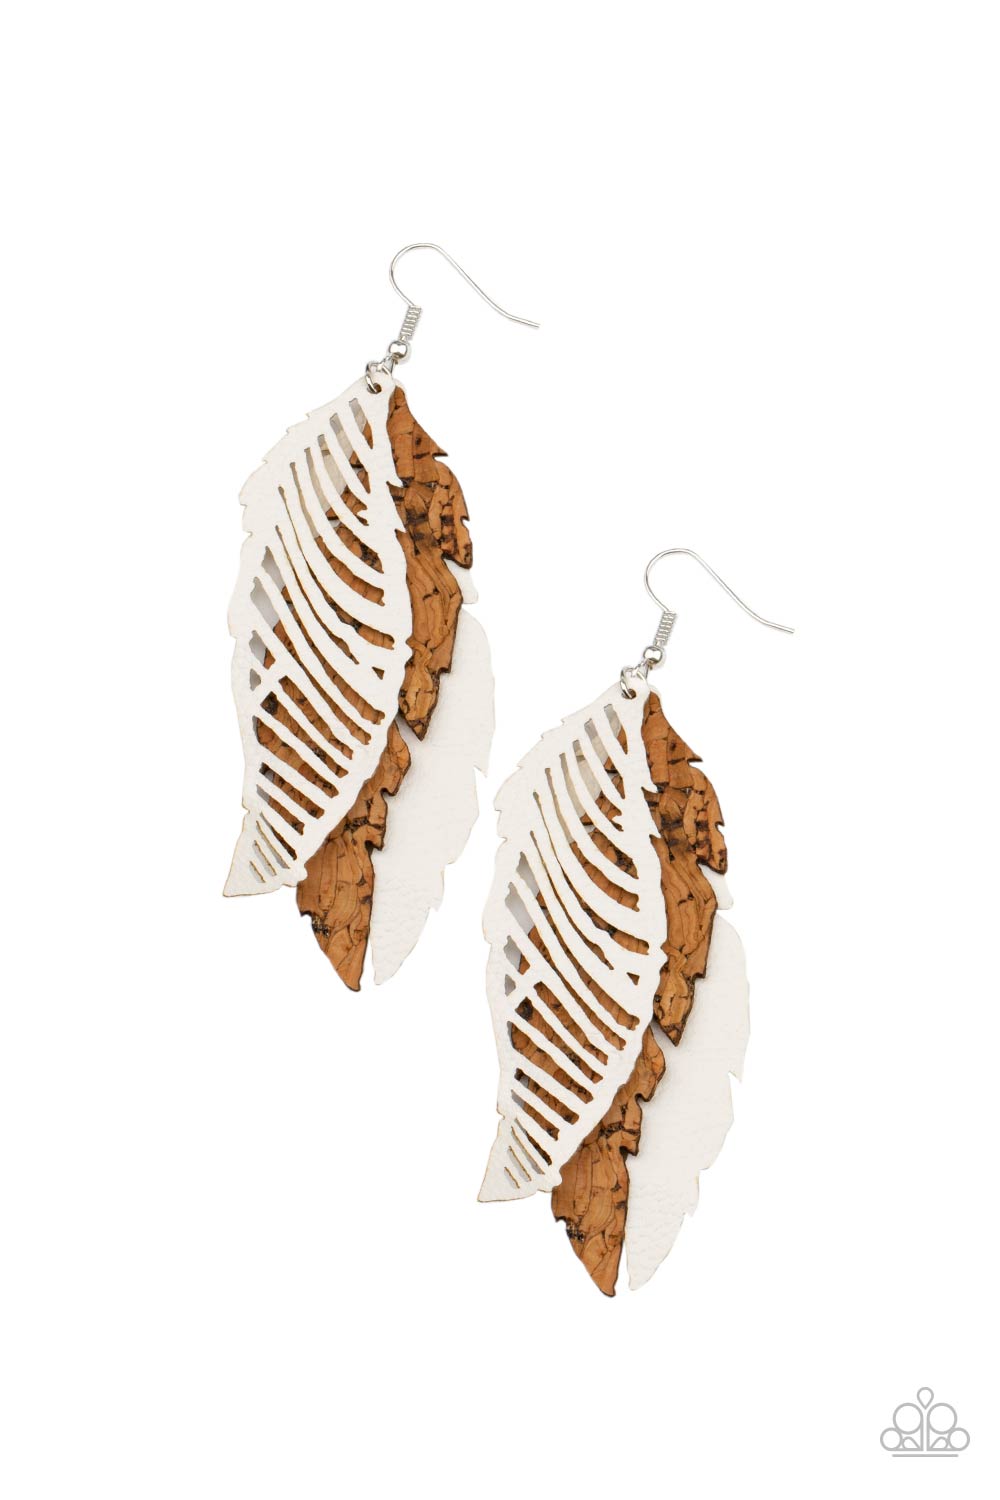 WINGING Off The Hook White Earring - Paparazzi Accessories  A mismatched collection of cork and white leather feather frames flutter from the ear, layering into a free-spirited lure. Earring attaches to a standard fishhook fitting.  ﻿All Paparazzi Accessories are lead free and nickel free!  Sold as one pair of earrings.